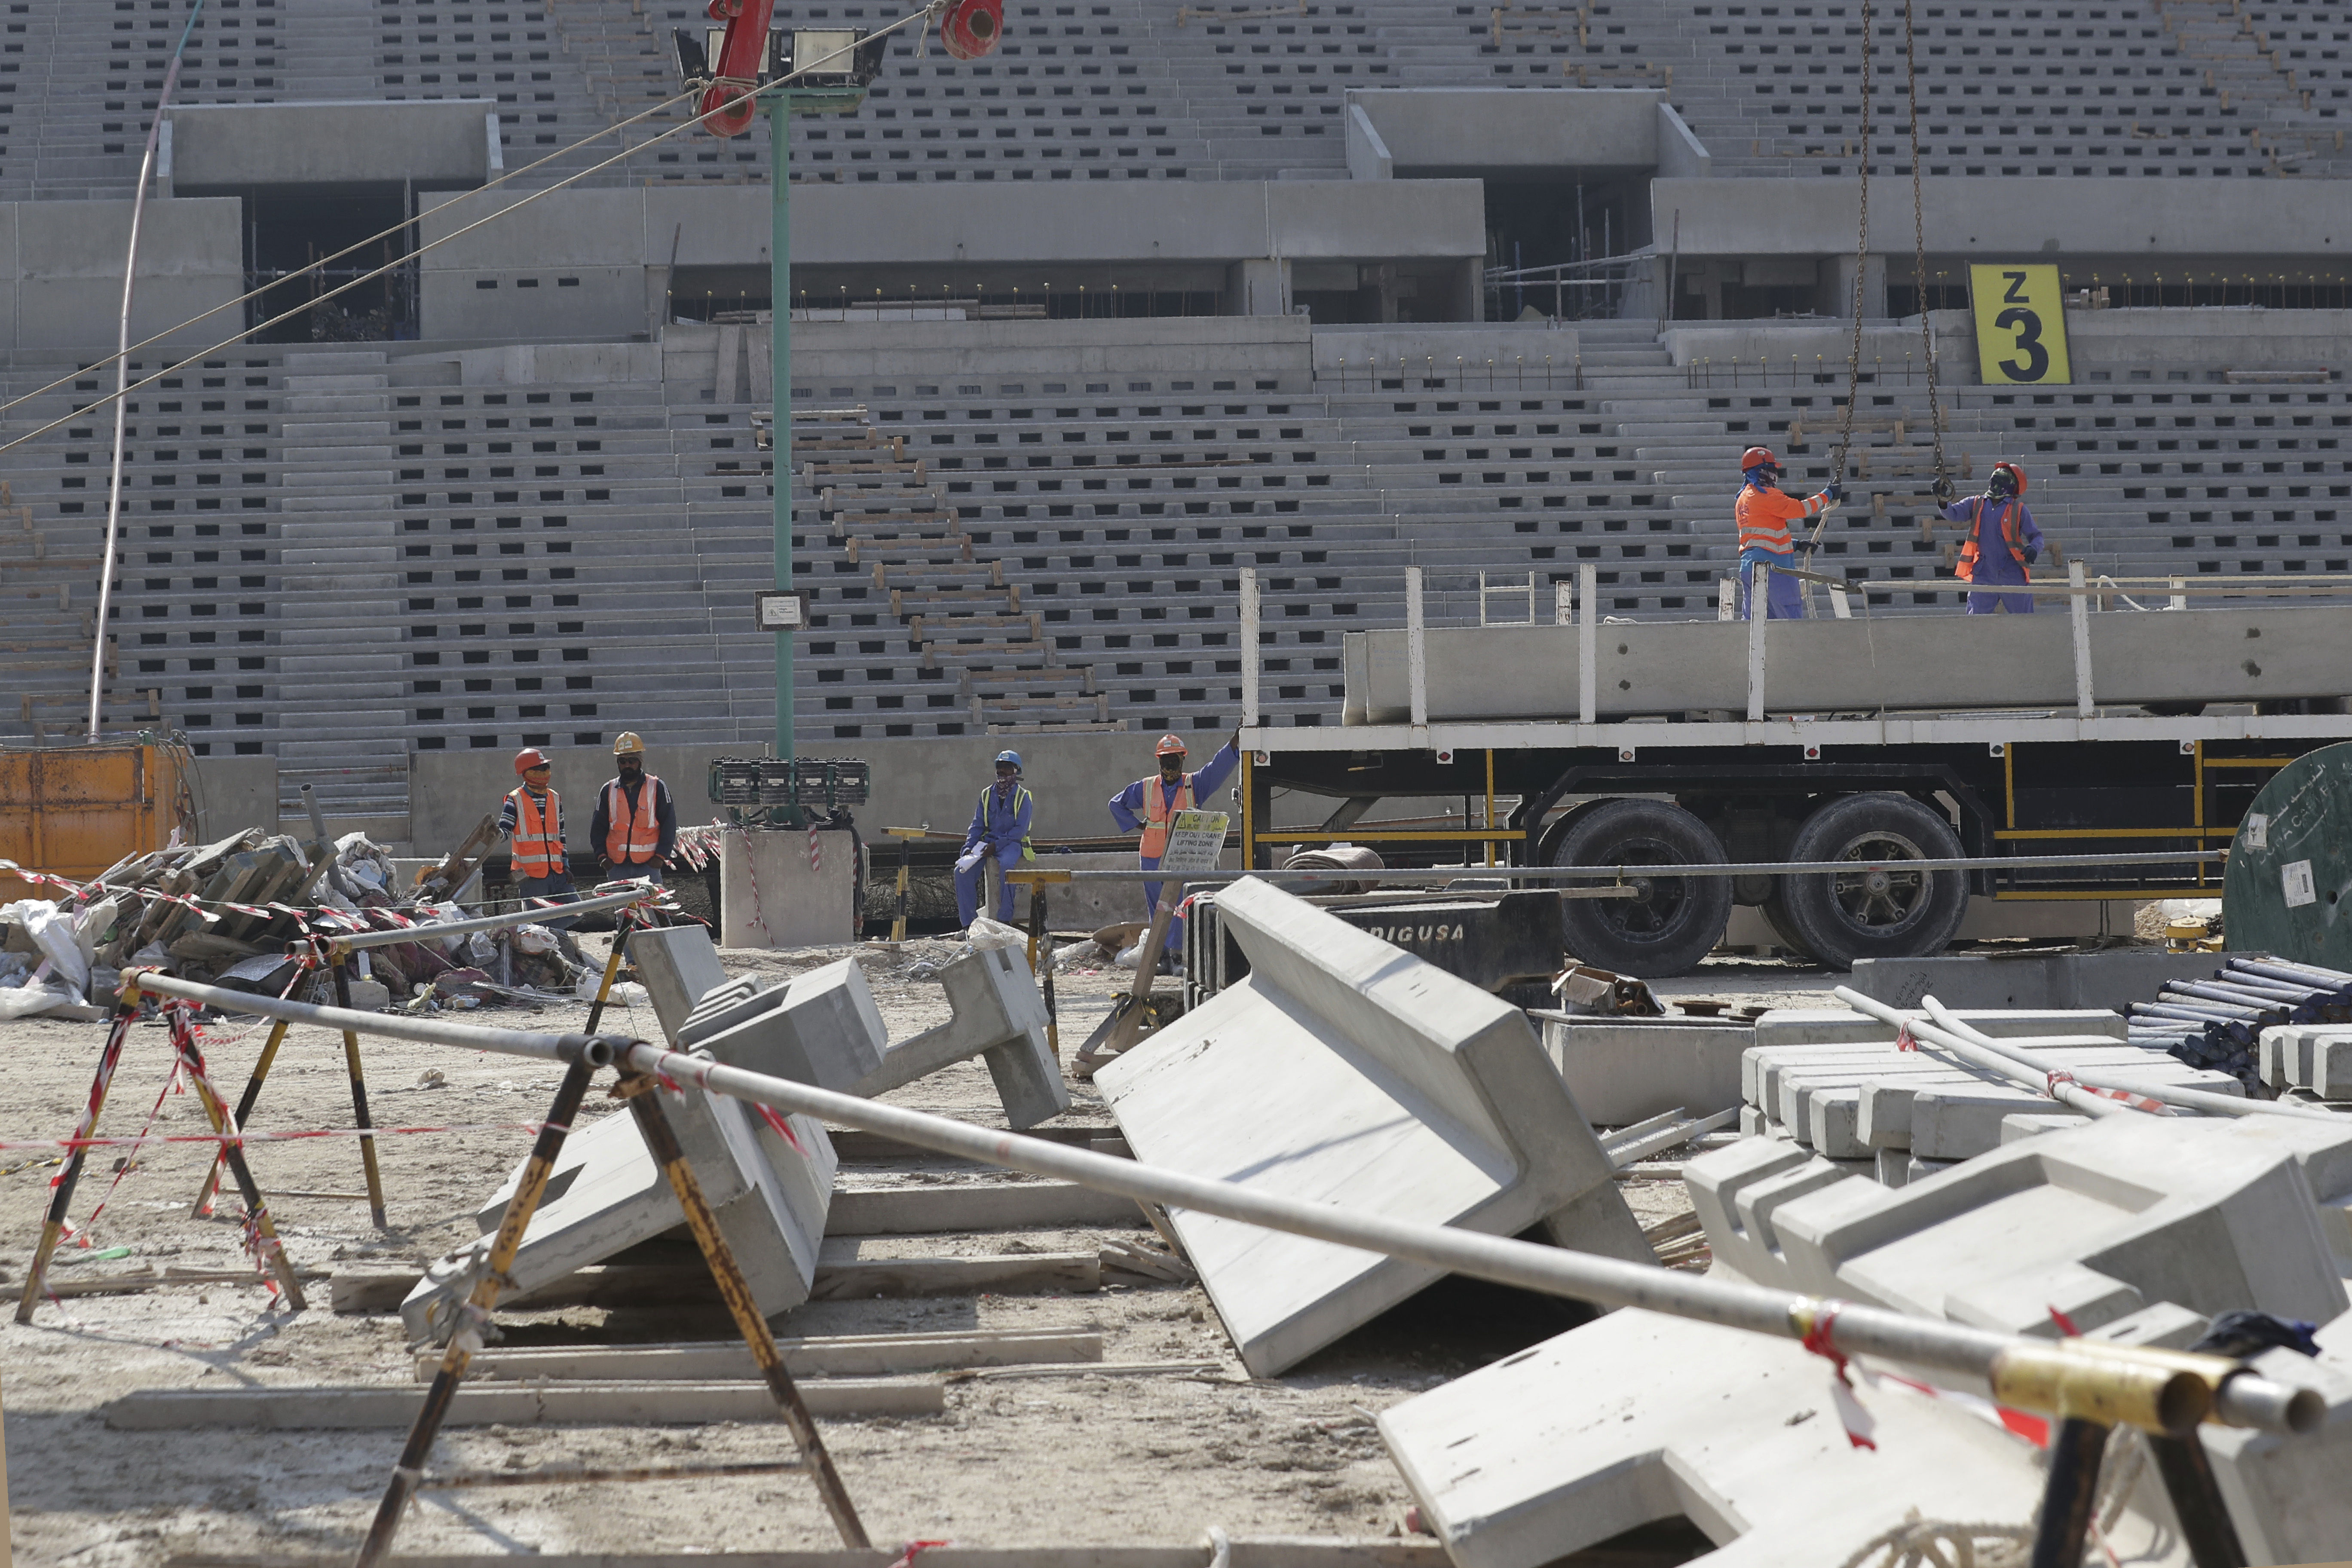 Workers work at Lusail Stadium, one of the 2022 World Cup stadiums, in Lusail, Qatar, Friday, Dec. 20, 2019. Construction is underway to complete Lusail's 80,000-seat venue for the opening game and final in a city that didn't exist when Qatar won the FIFA vote in 2010. (AP Photo/Hassan Ammar)